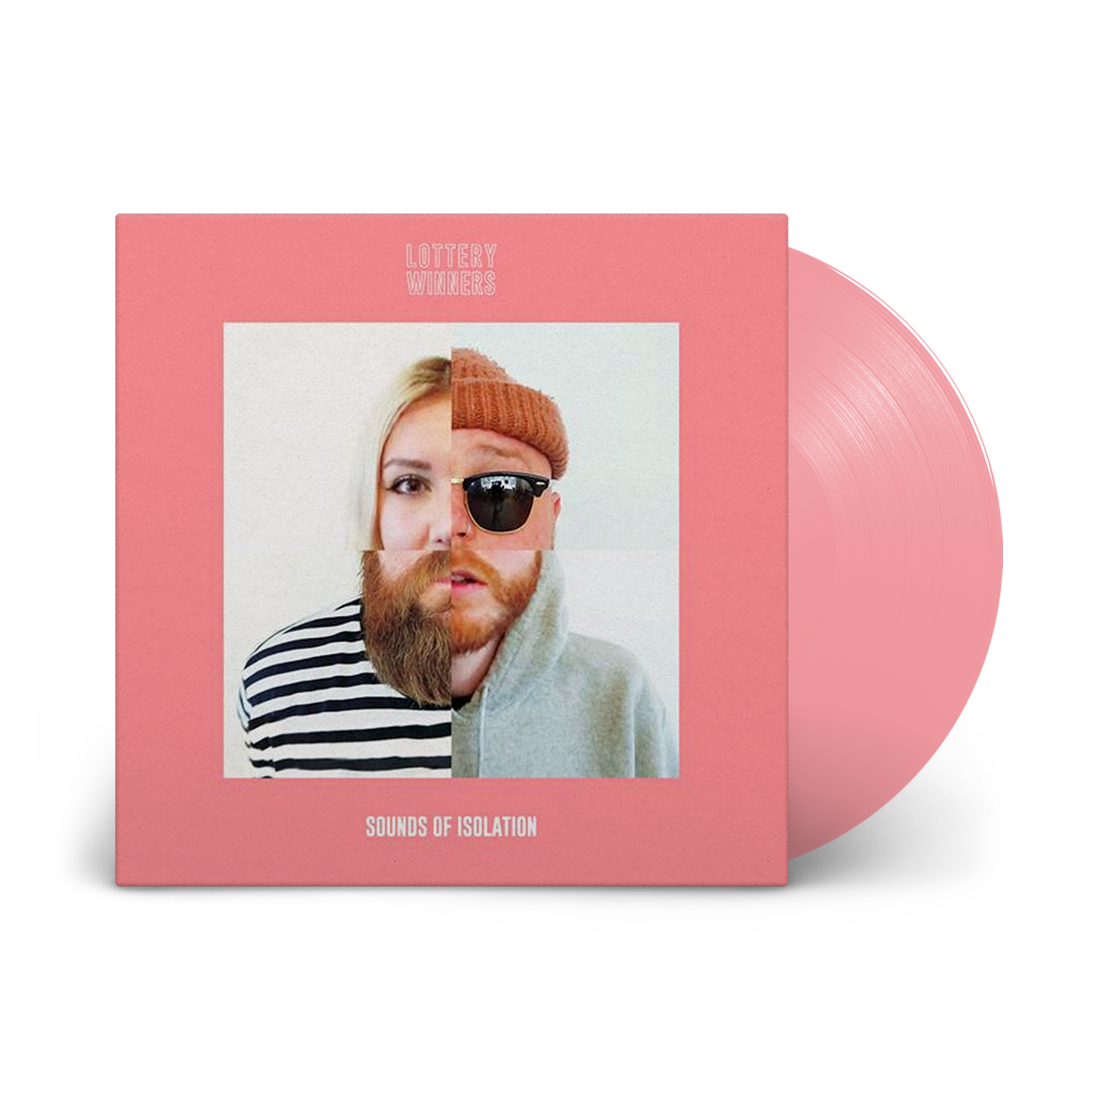 Sounds of Isolation: Pink Vinyl LP